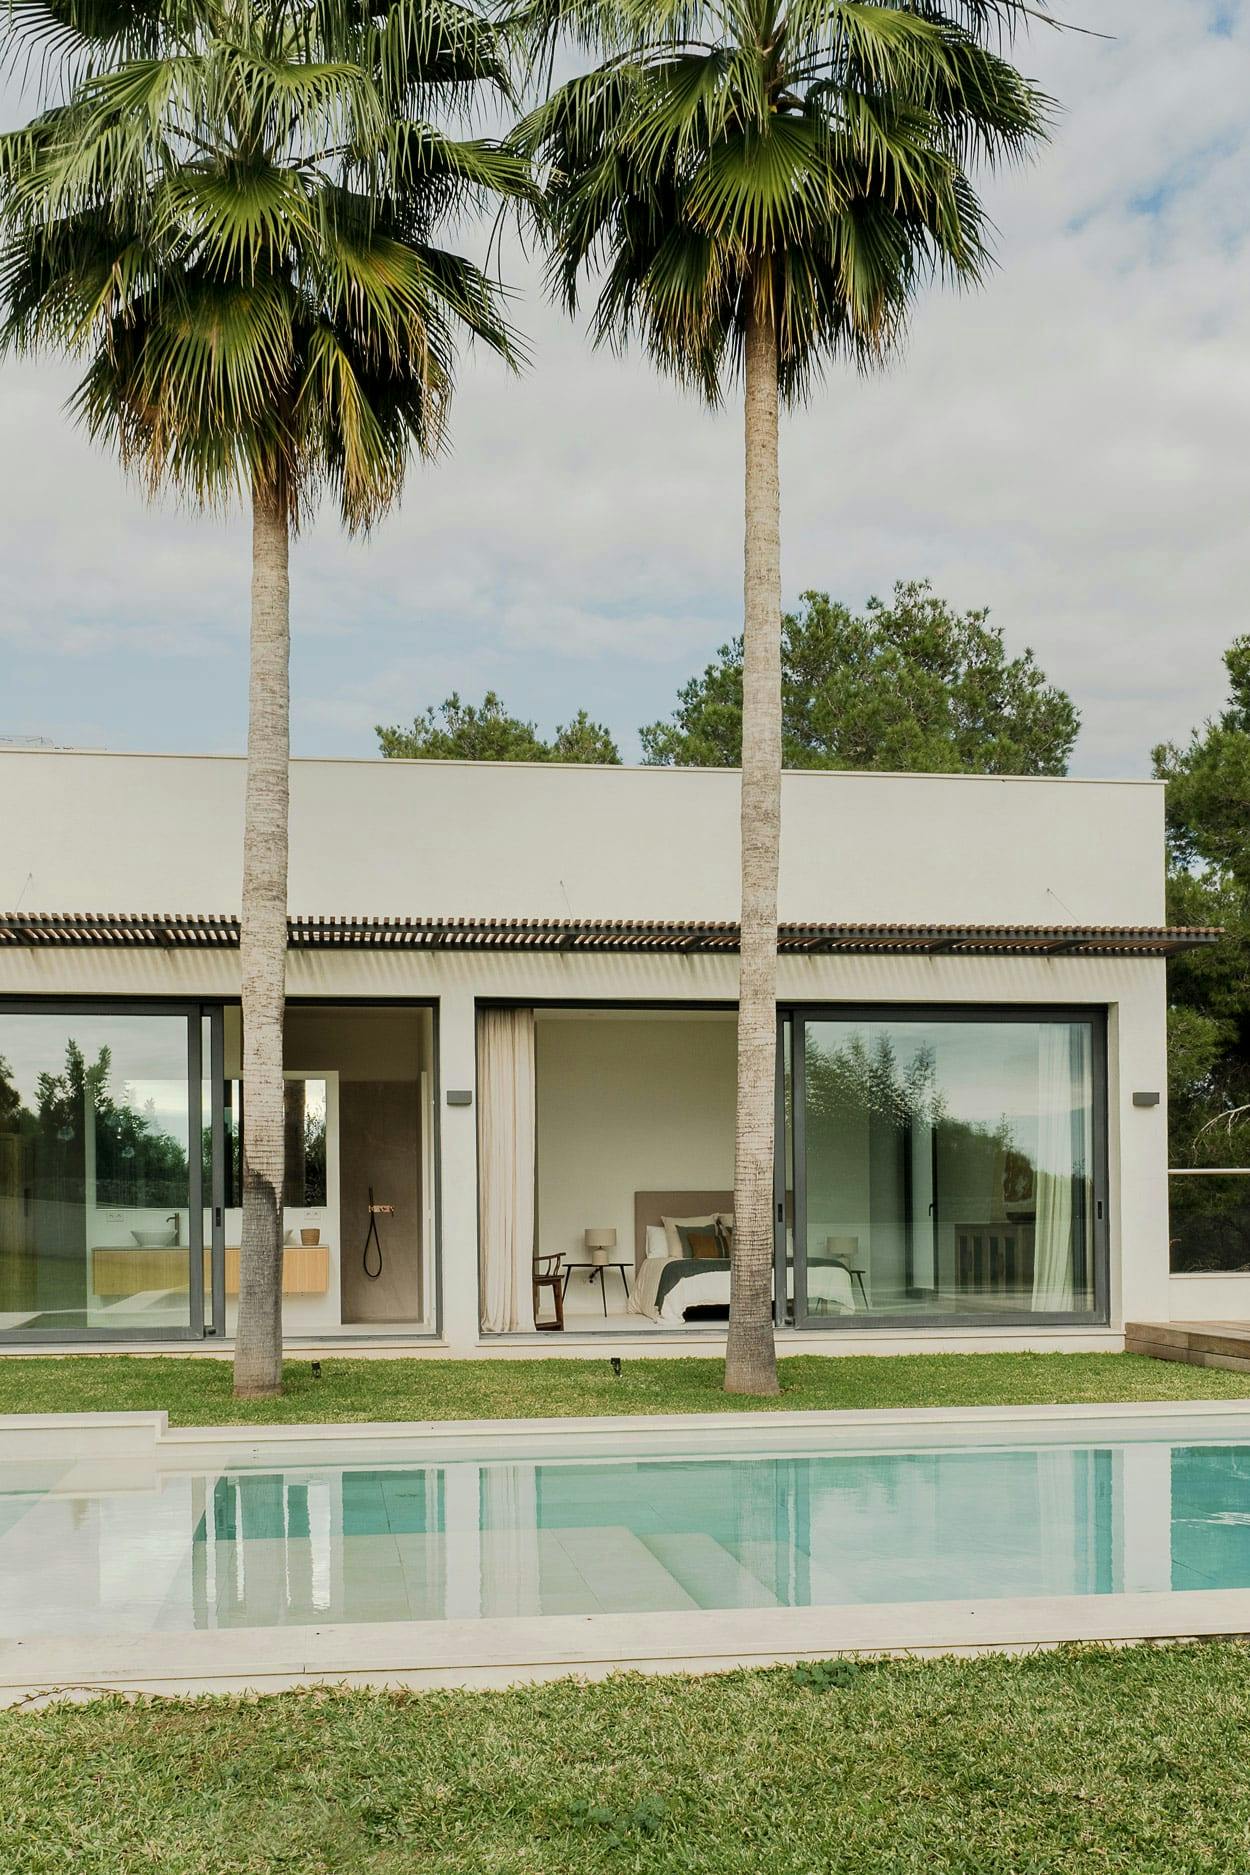 A large, modern house with a swimming pool is surrounded by palm trees, creating a tropical atmosphere. The house has a large glass door and a white exterior, and there are several chairs and a dining table placed around the pool area.